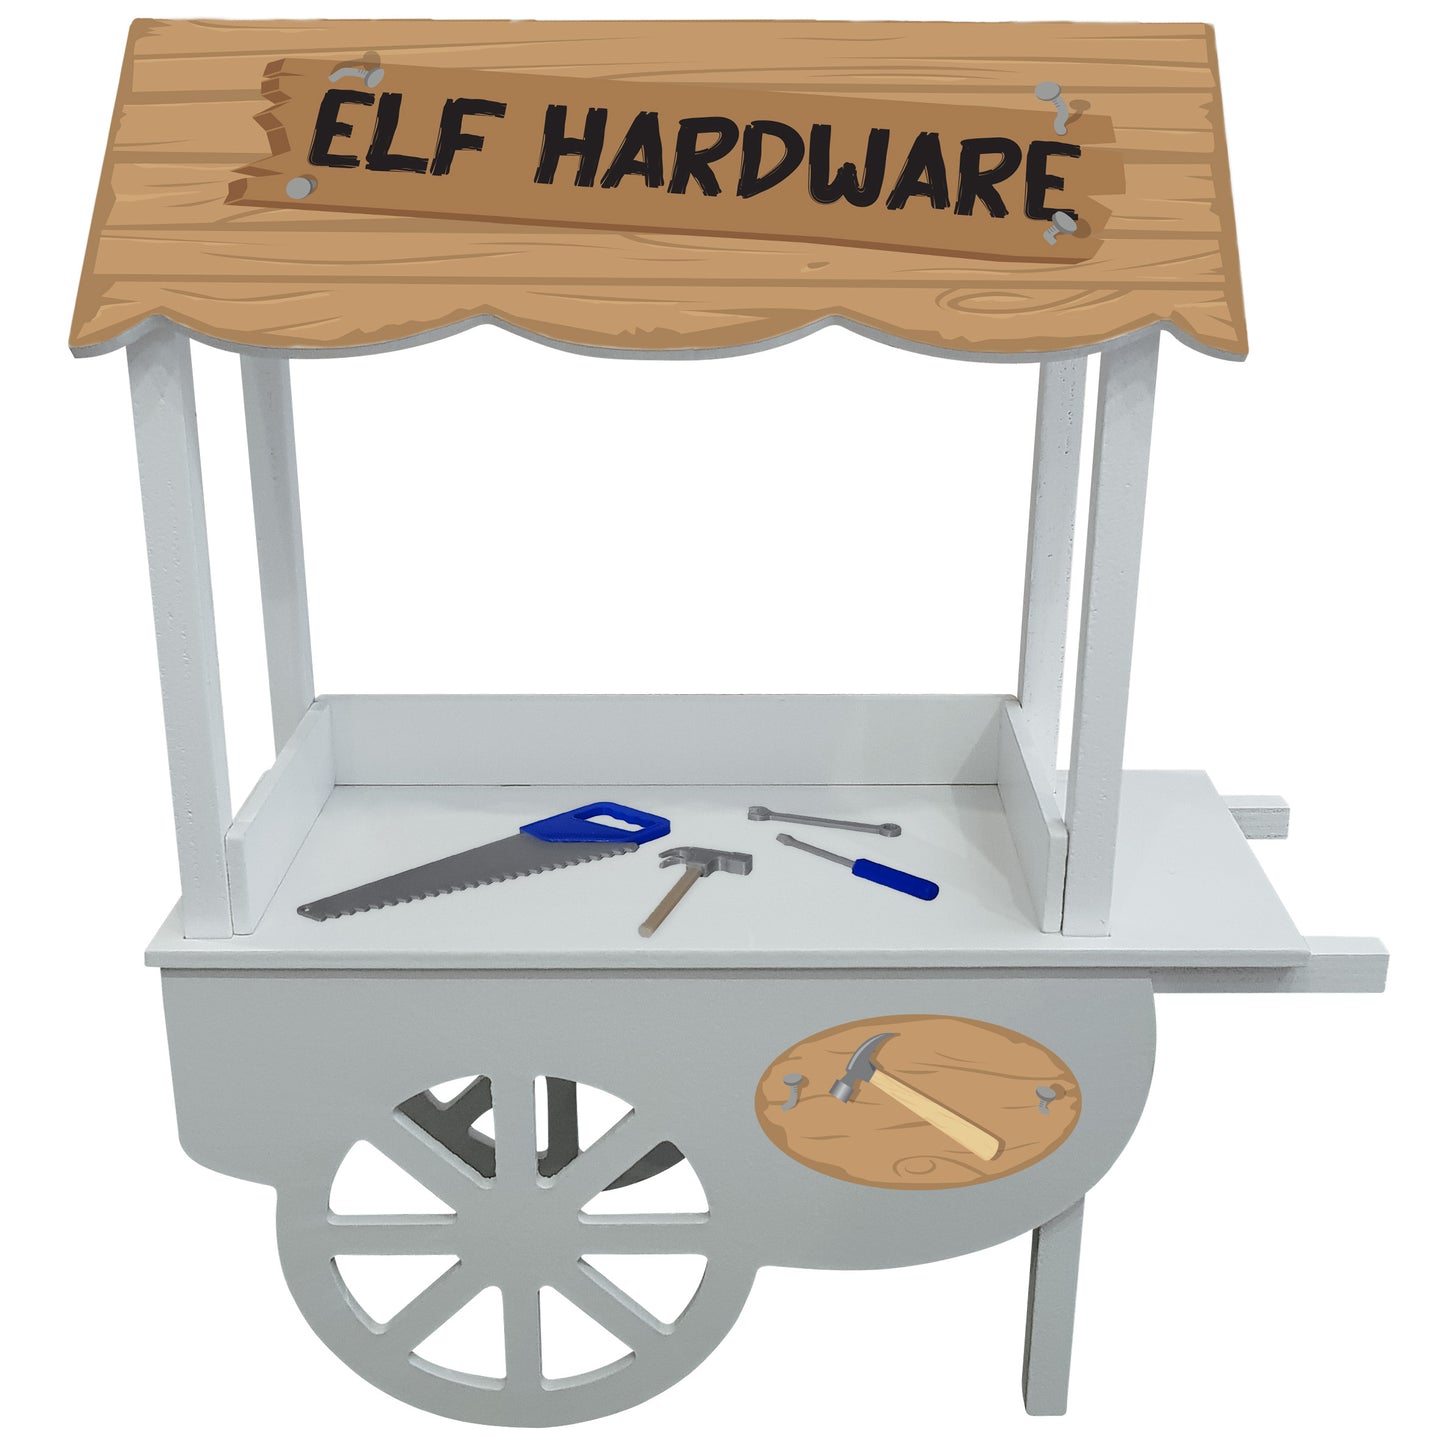 Elf hardware shop with miniature tools